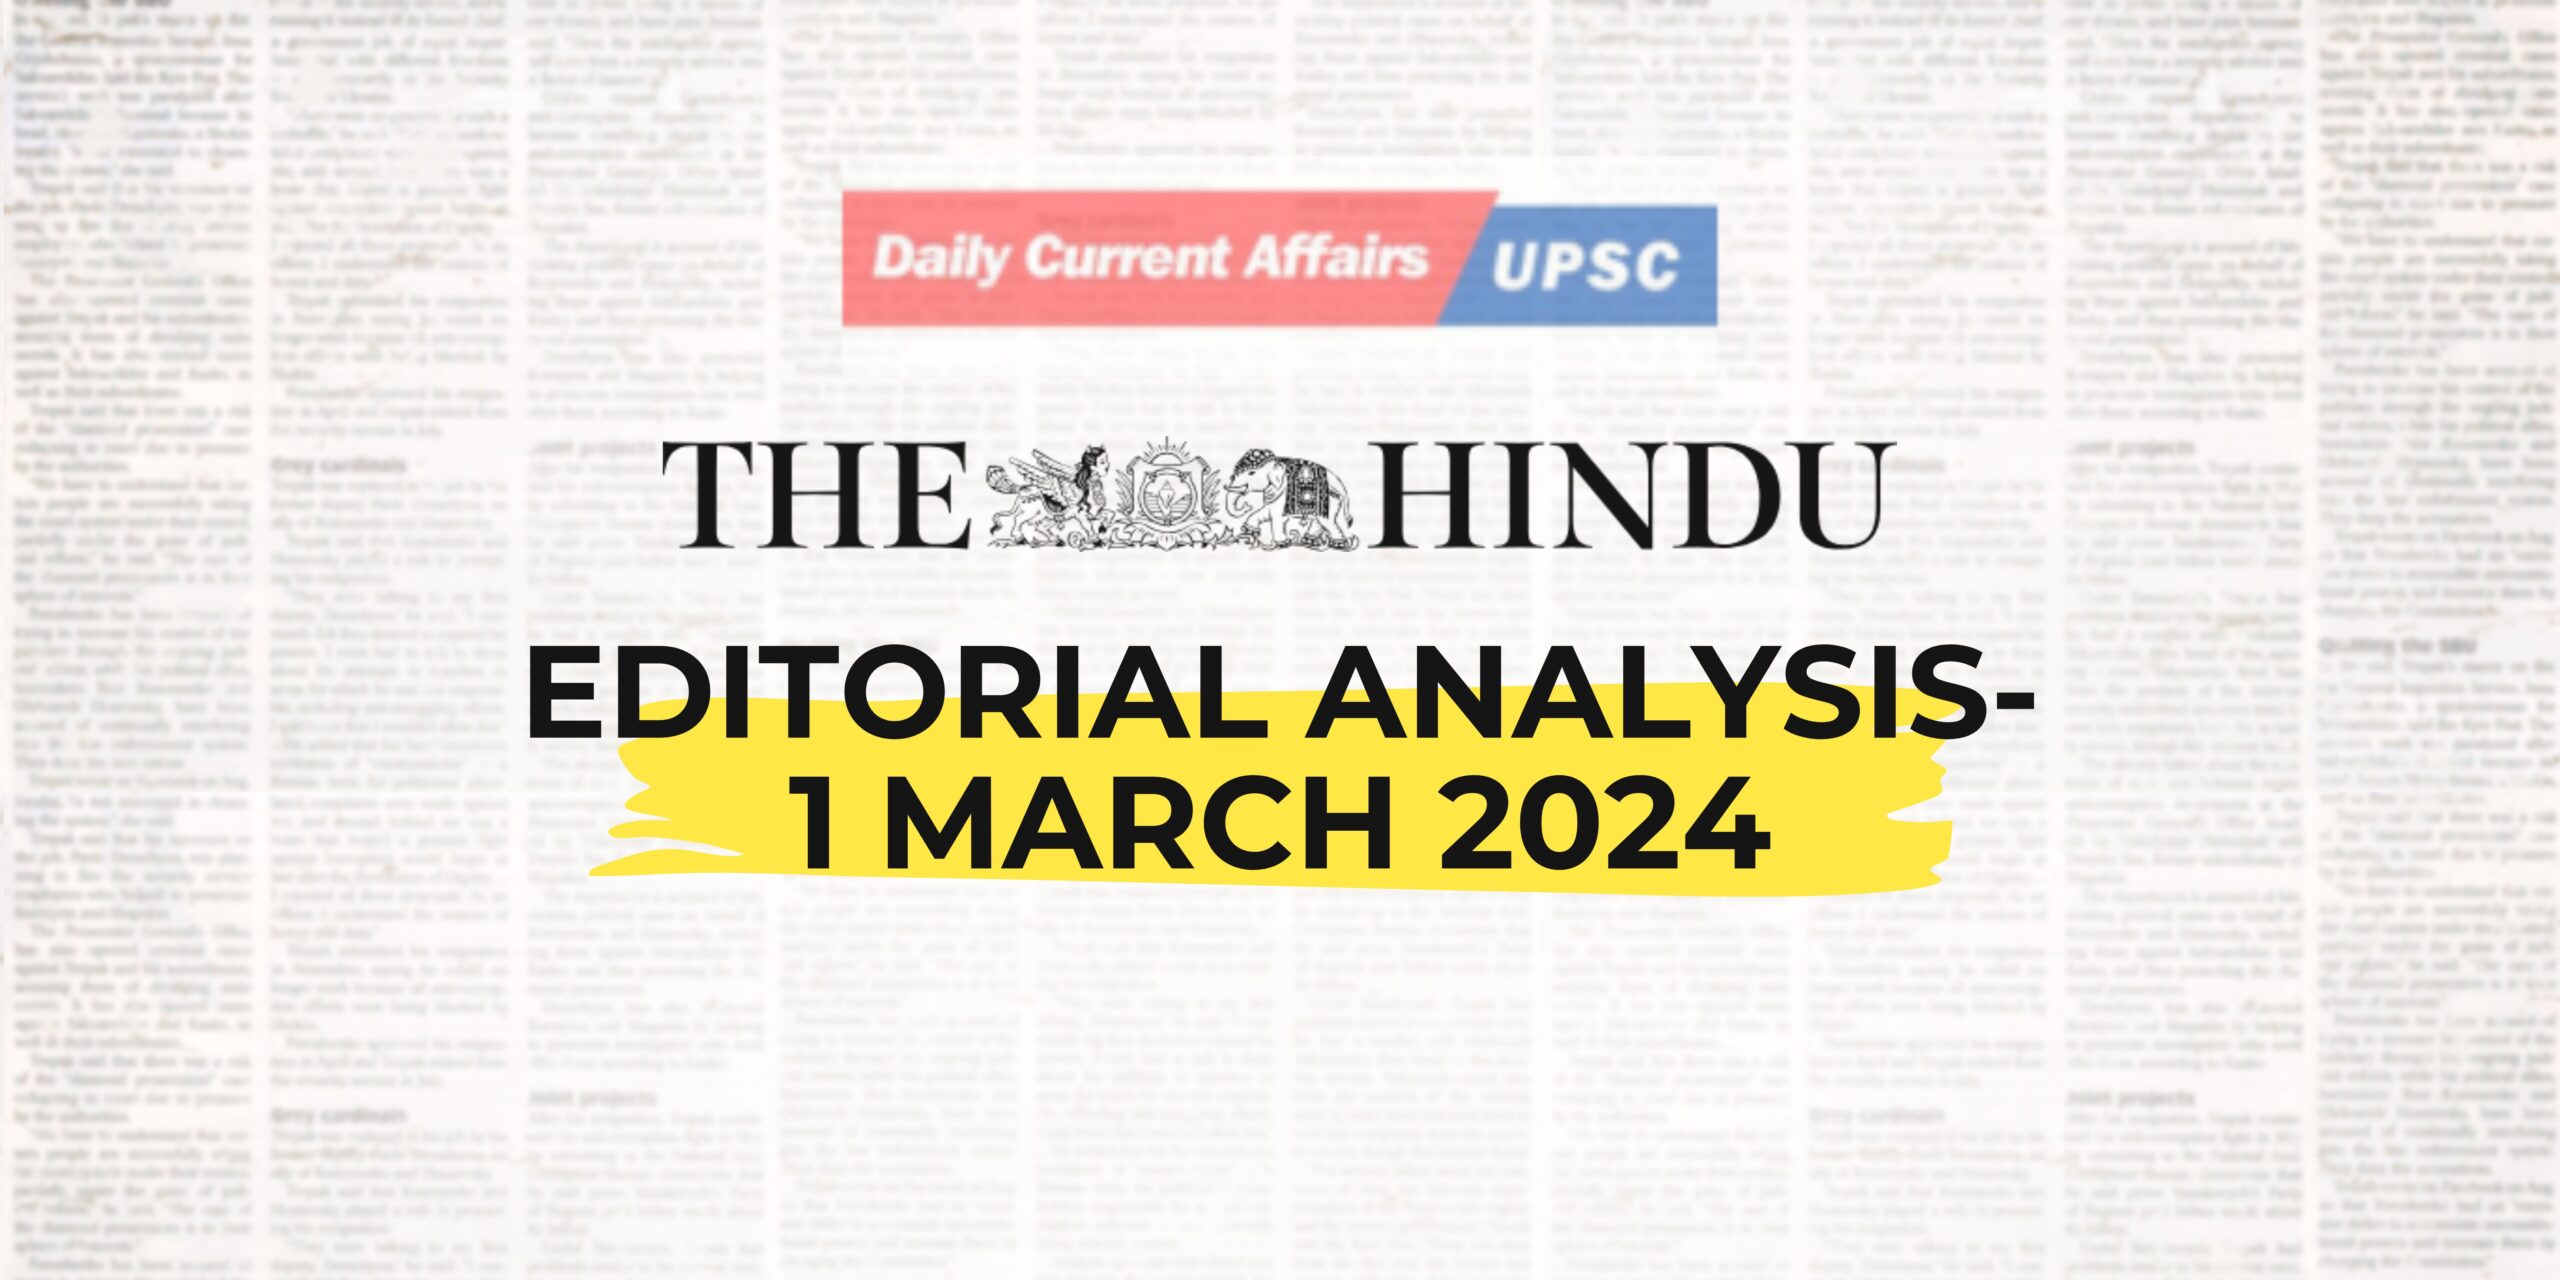 The Hindu Editorial Analysis- 1 March 2024